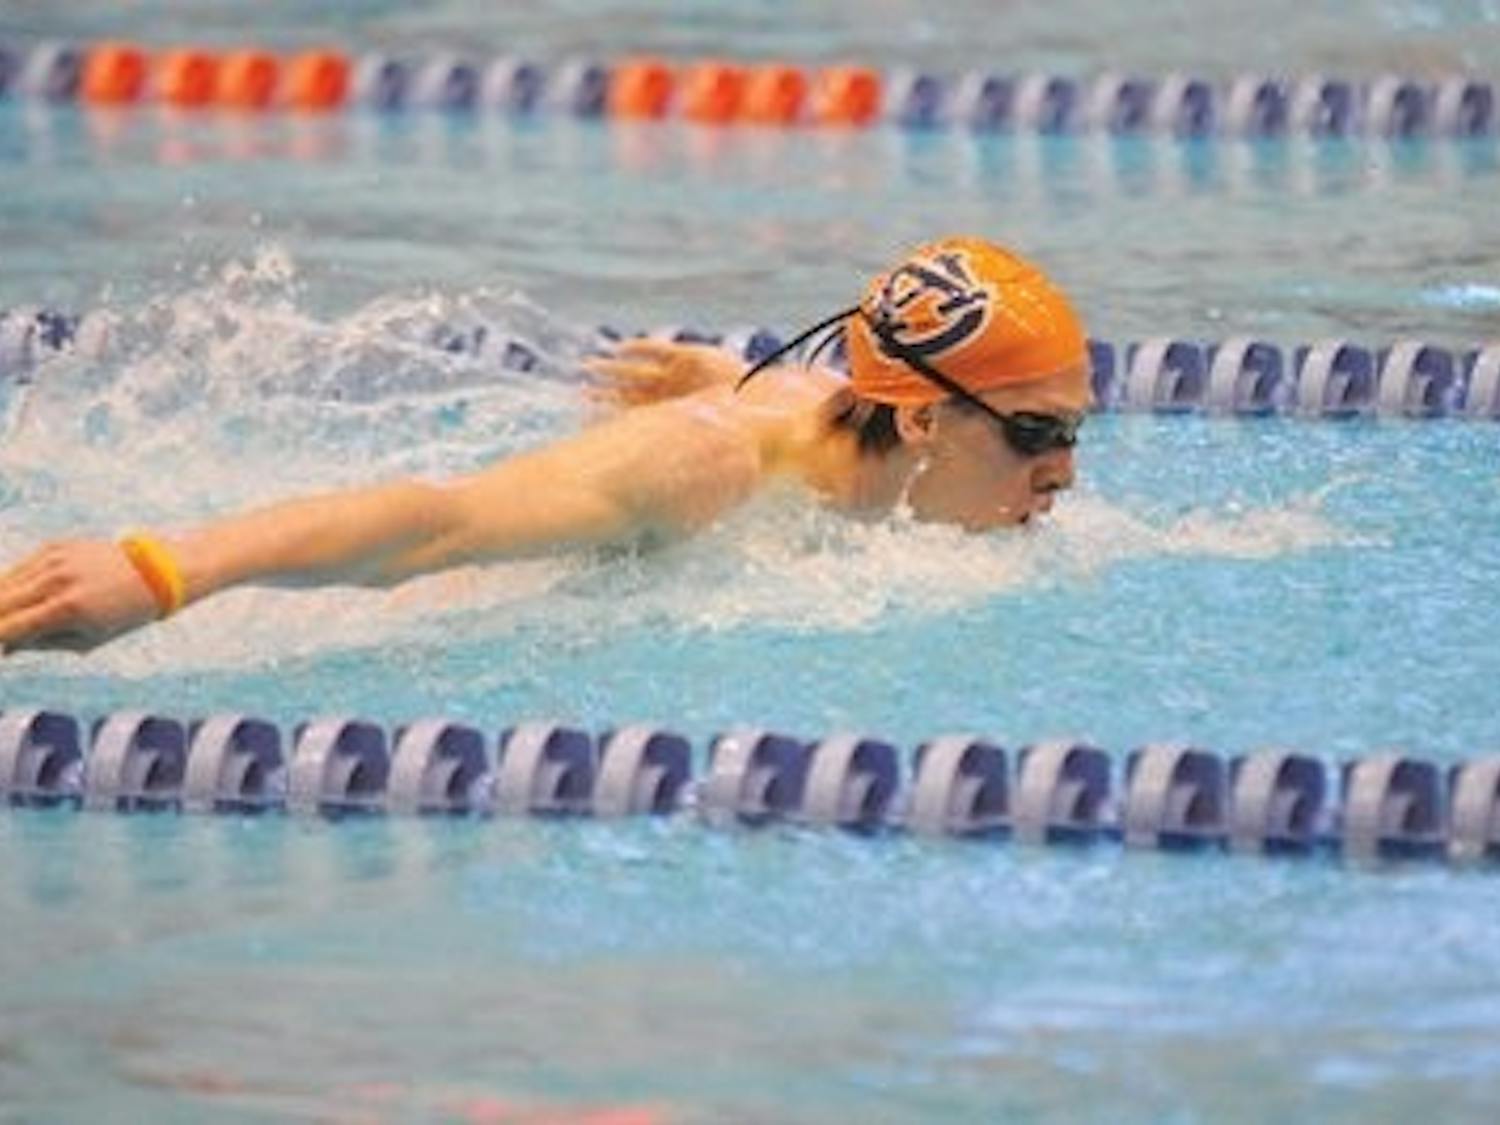 Freshman Zane Grothe swims the butterfly during Sunday's meet against Texas. Grothe finished third in the men's 1000-yard freestyle and finished fourth in the 500-yard freestyle. (Christen Harned / ASSISTANT PHOTO EDITOR)